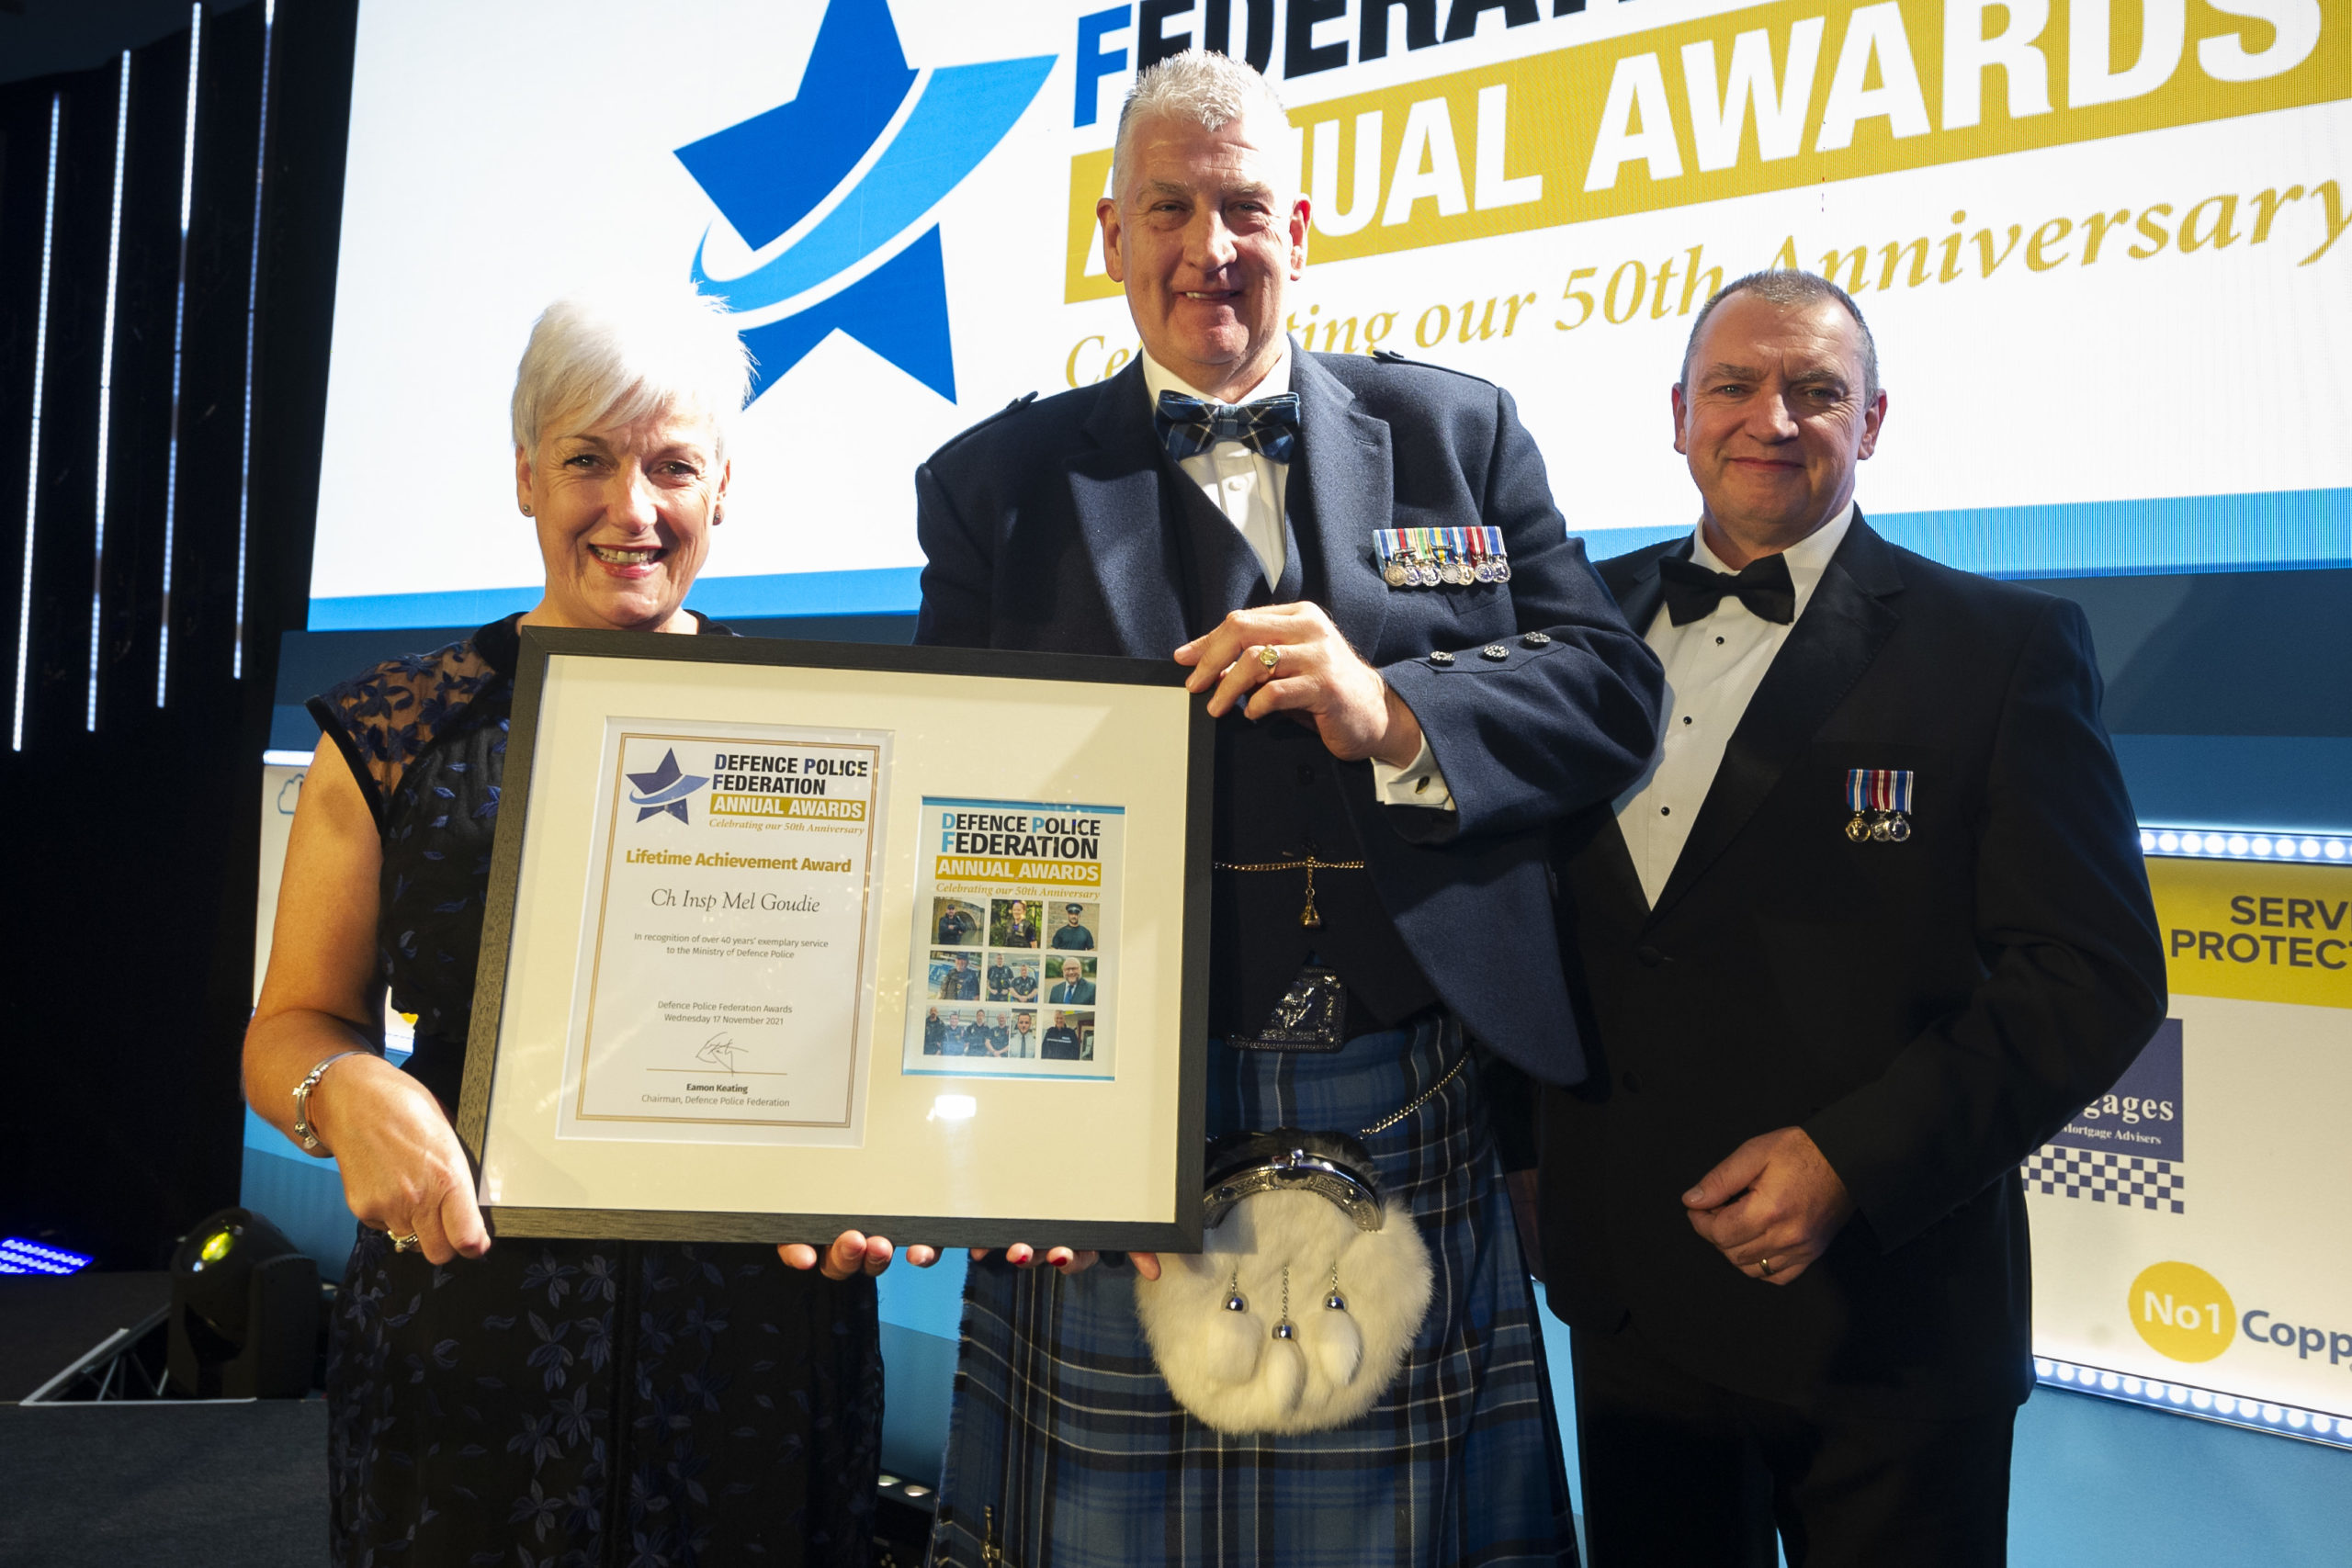 Lifetime Achievement Award for Chief Inspector who ‘loved every minute’ of his long career